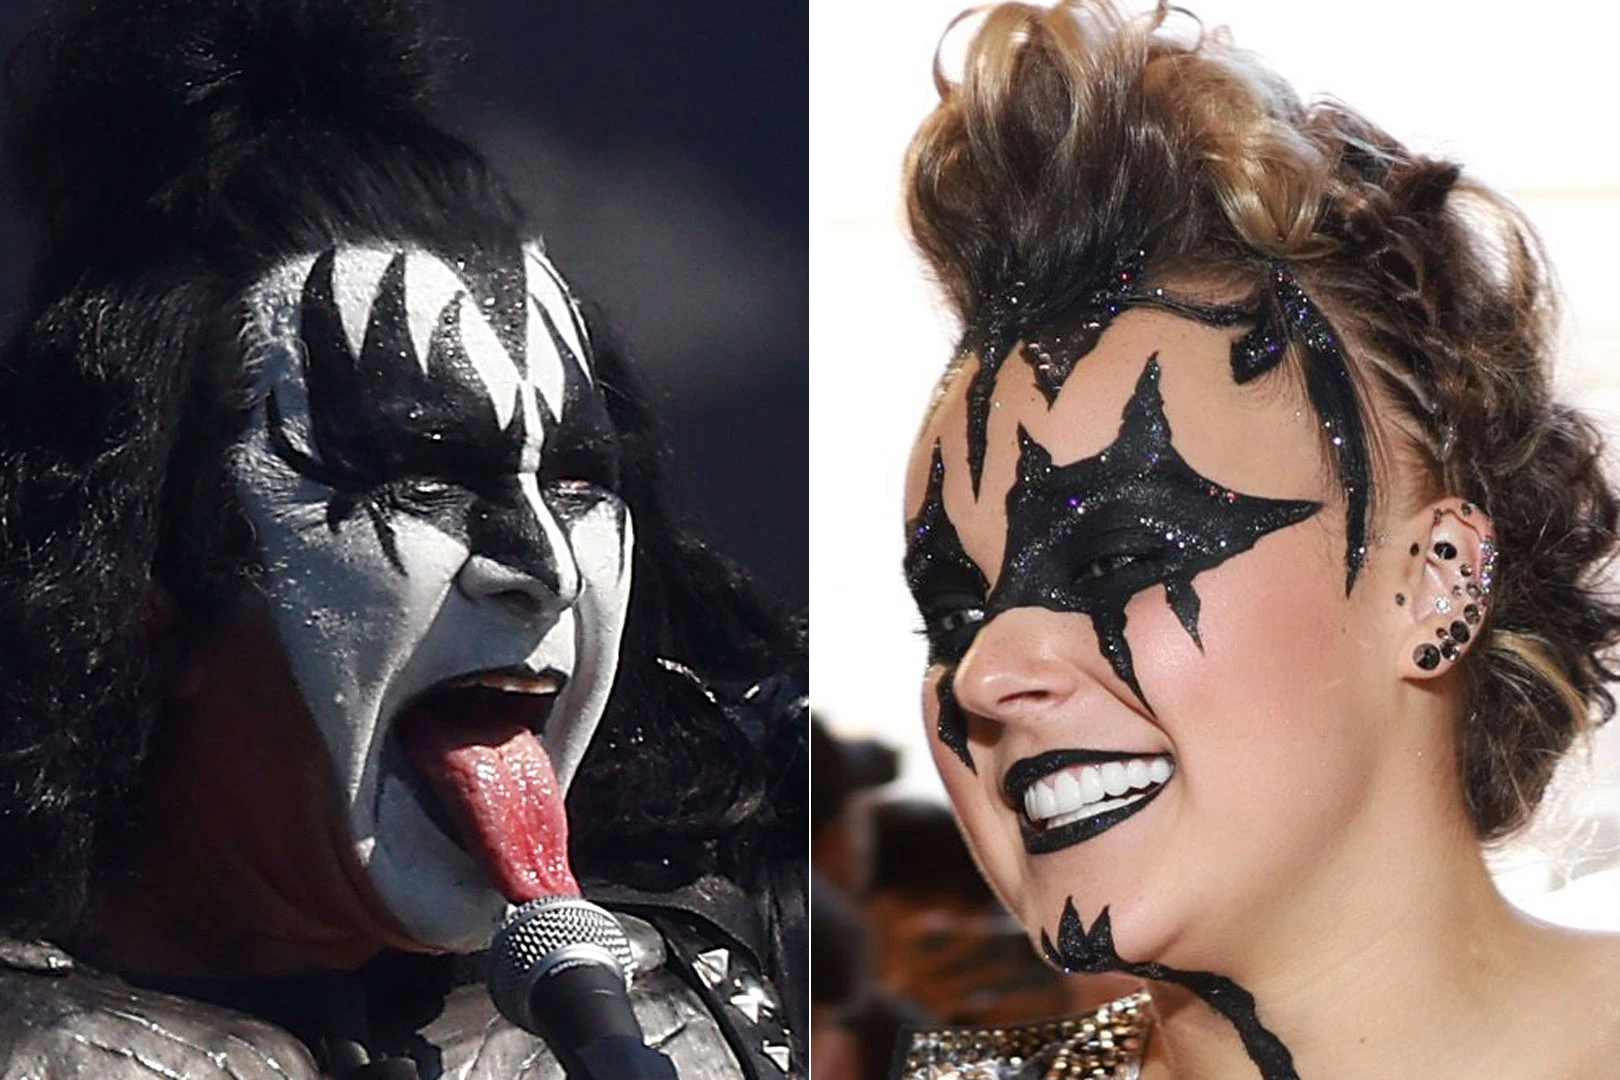 Did a Pop Star Steal the KISS ‘Demon’ Look? Gene Simmons Responds